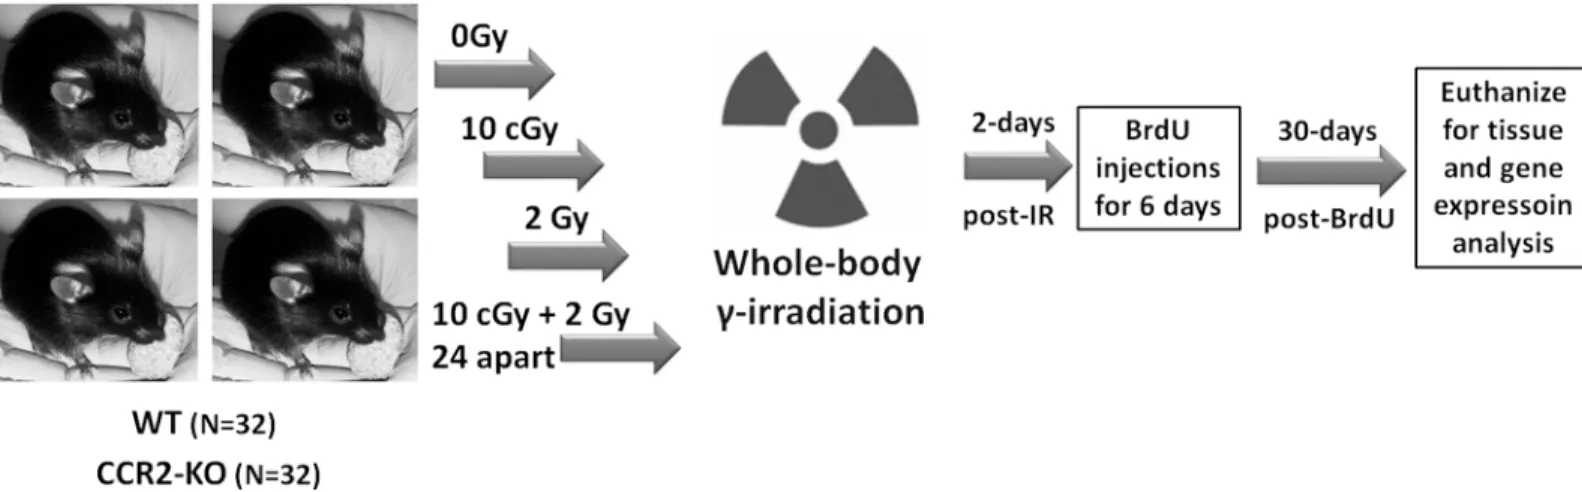 Fig 1. Schematics of research design. WT and CCR2-KO mice were divided into 4 experimental groups (0, 10 cGy, 2Gy, 10 cGy + 2 Gy 24h apart)